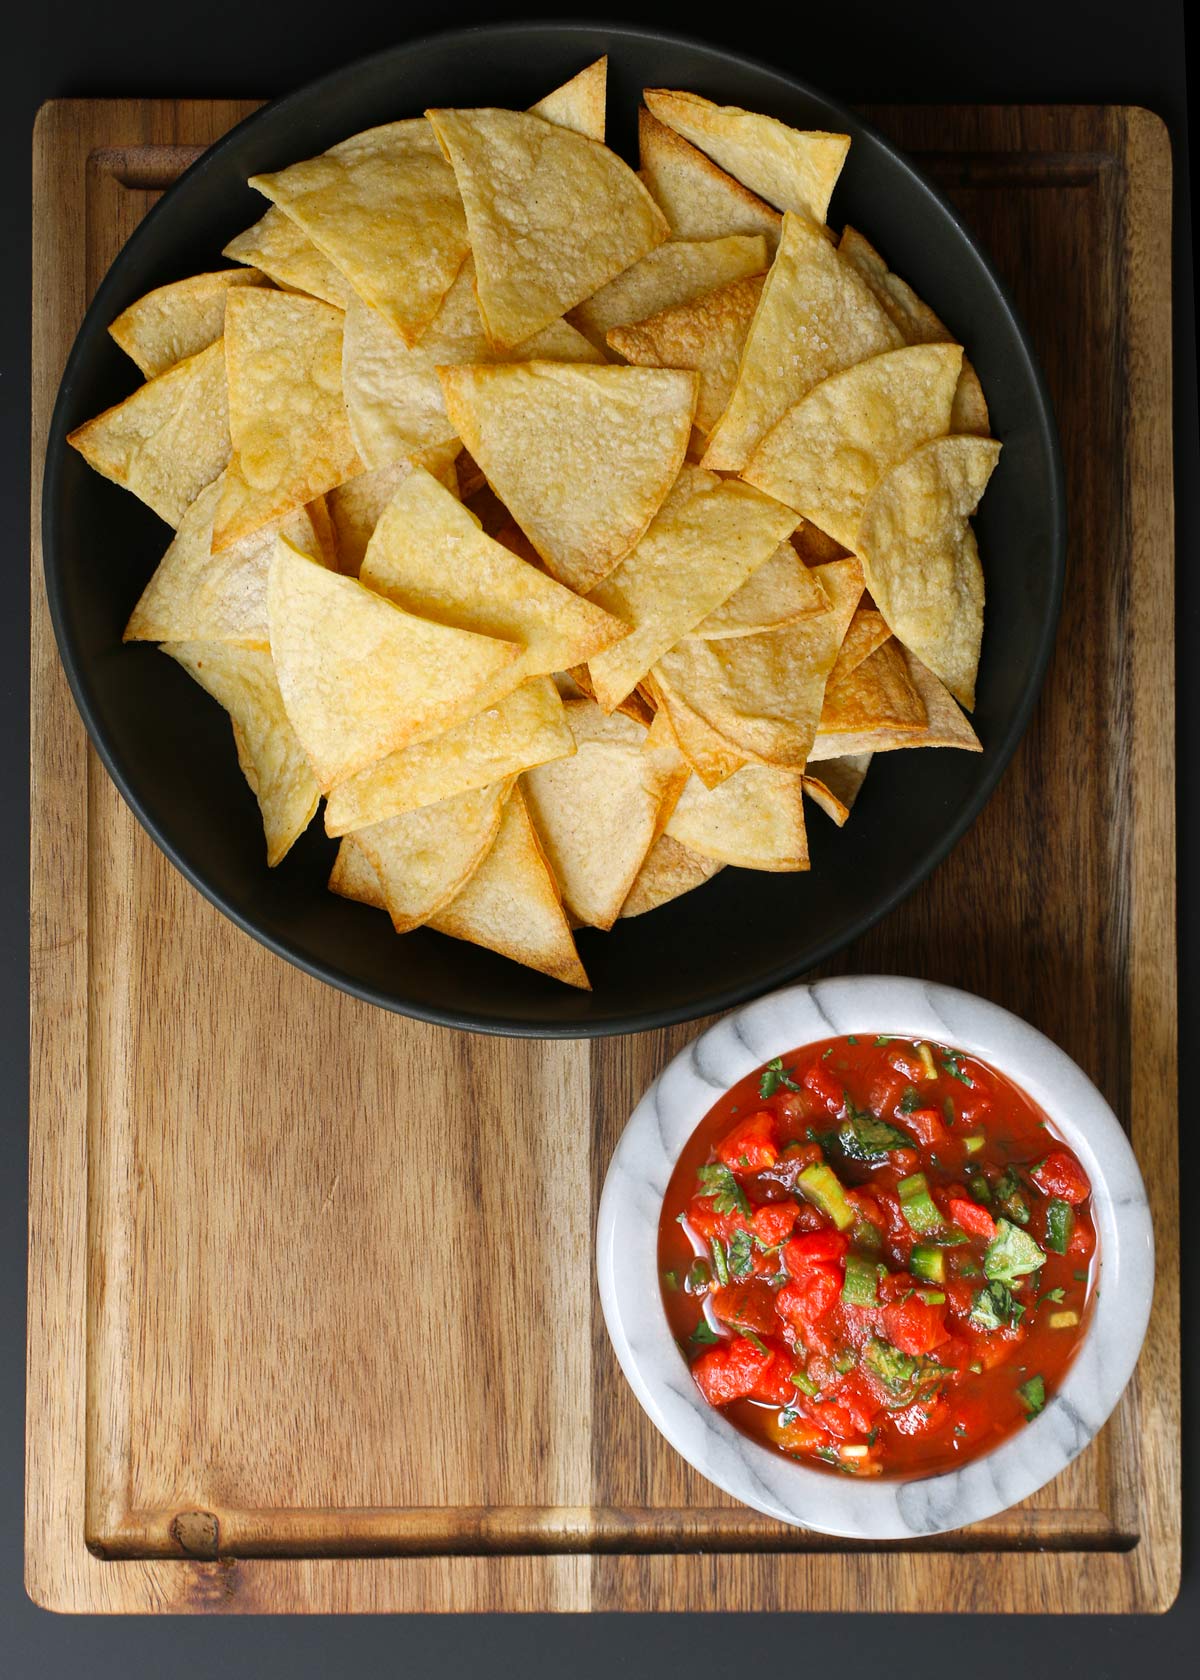 black bowl of tortilla chips and marble bowl of salsa on a wood board against a black backdrop.